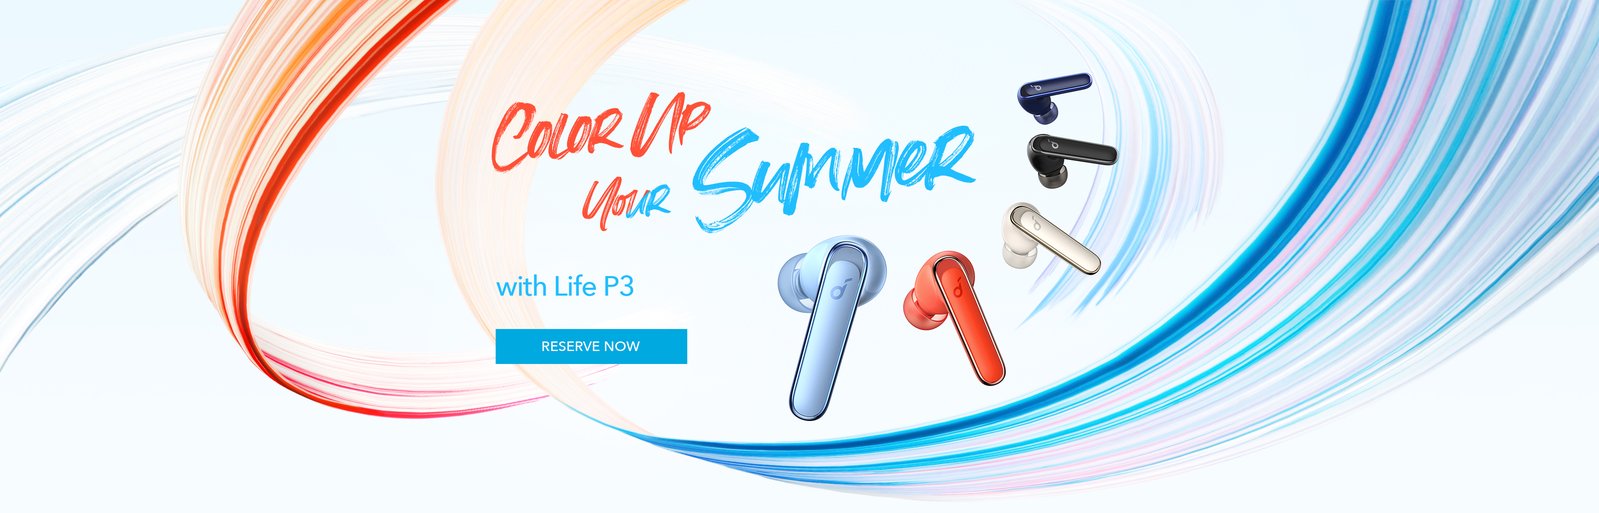 Soundcore’s upcoming Life P3 true wireless earbuds feature active noise cancelling for under $80